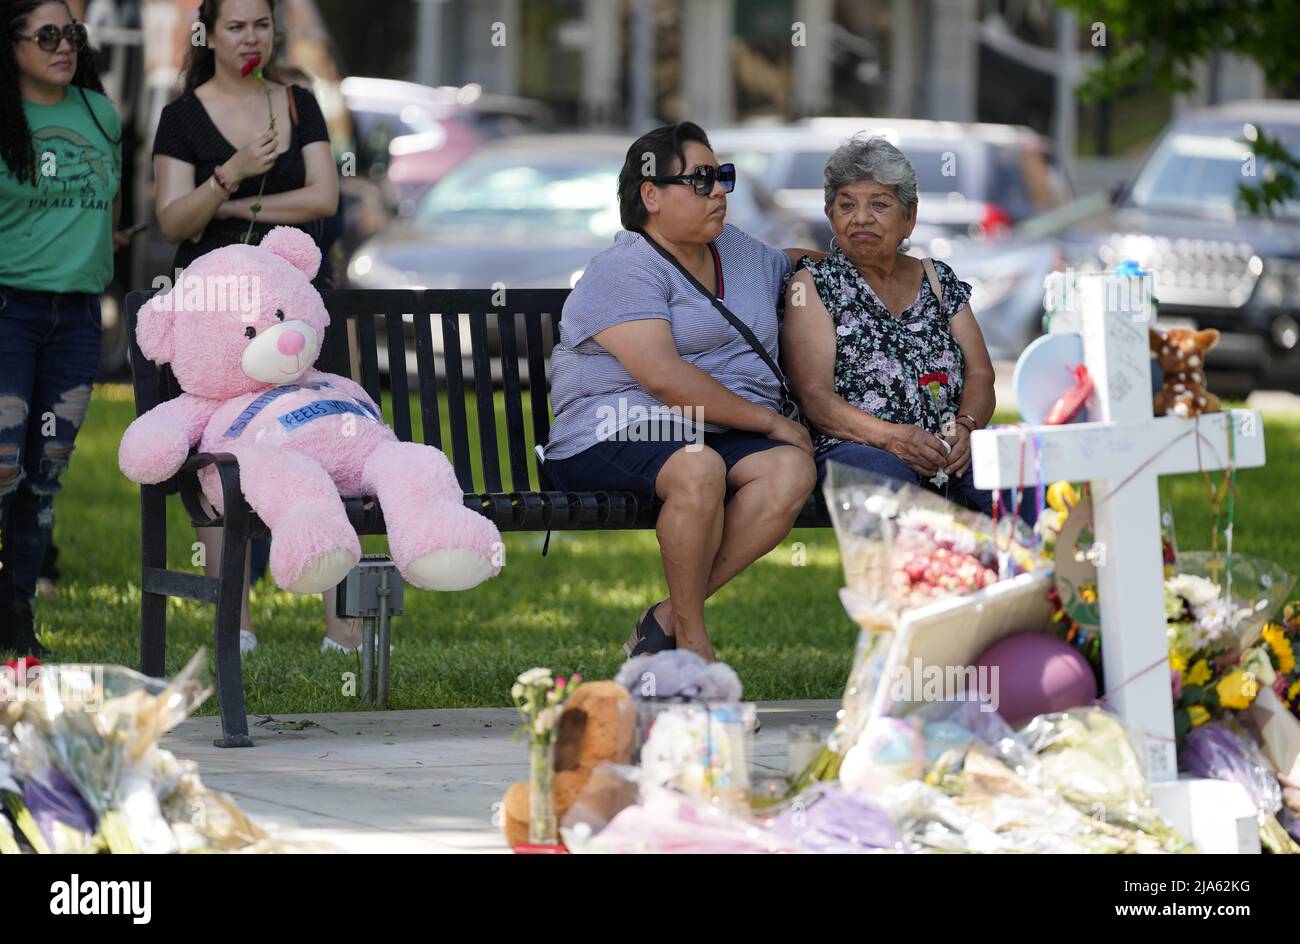 Uvalde, USA. 27th May, 2022. People mourn for victims of a school mass shooting at Town Square in Uvalde, Texas, the United States, May 27, 2022. At least 19 children and two adults were killed in a shooting at Robb Elementary School in the town of Uvalde, Texas, on Tuesday. Credit: Wu Xiaoling/Xinhua/Alamy Live News Stock Photo